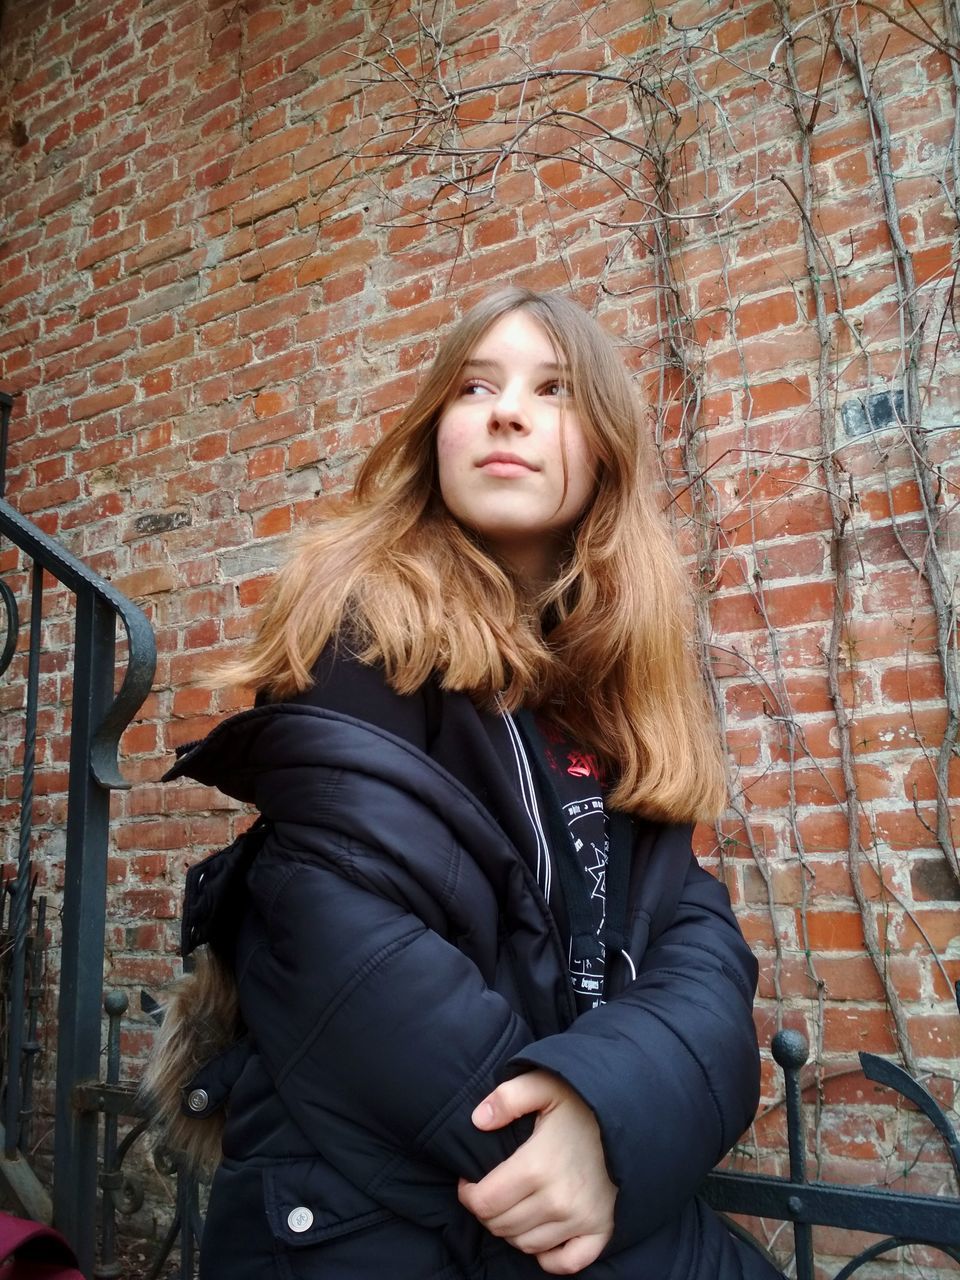 brick wall, hair, brick, one person, wall, long hair, wall - building feature, hairstyle, young adult, real people, lifestyles, blond hair, young women, leisure activity, front view, architecture, portrait, jacket, beautiful woman, warm clothing, teenager, outdoors, leather